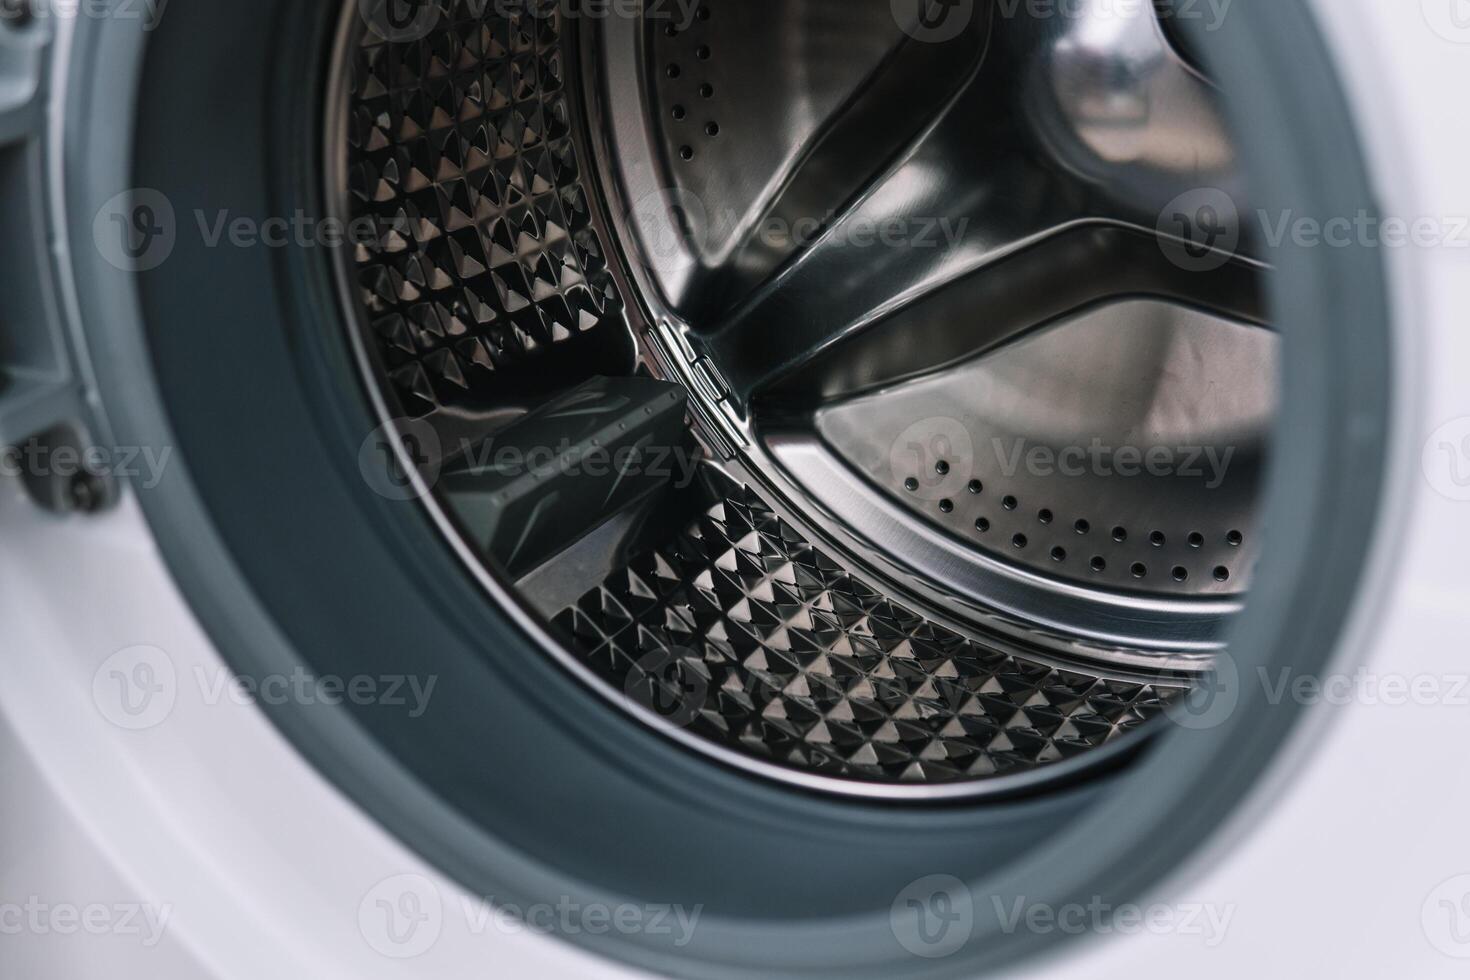 Washing dryer machine inside view of a drum close up photo